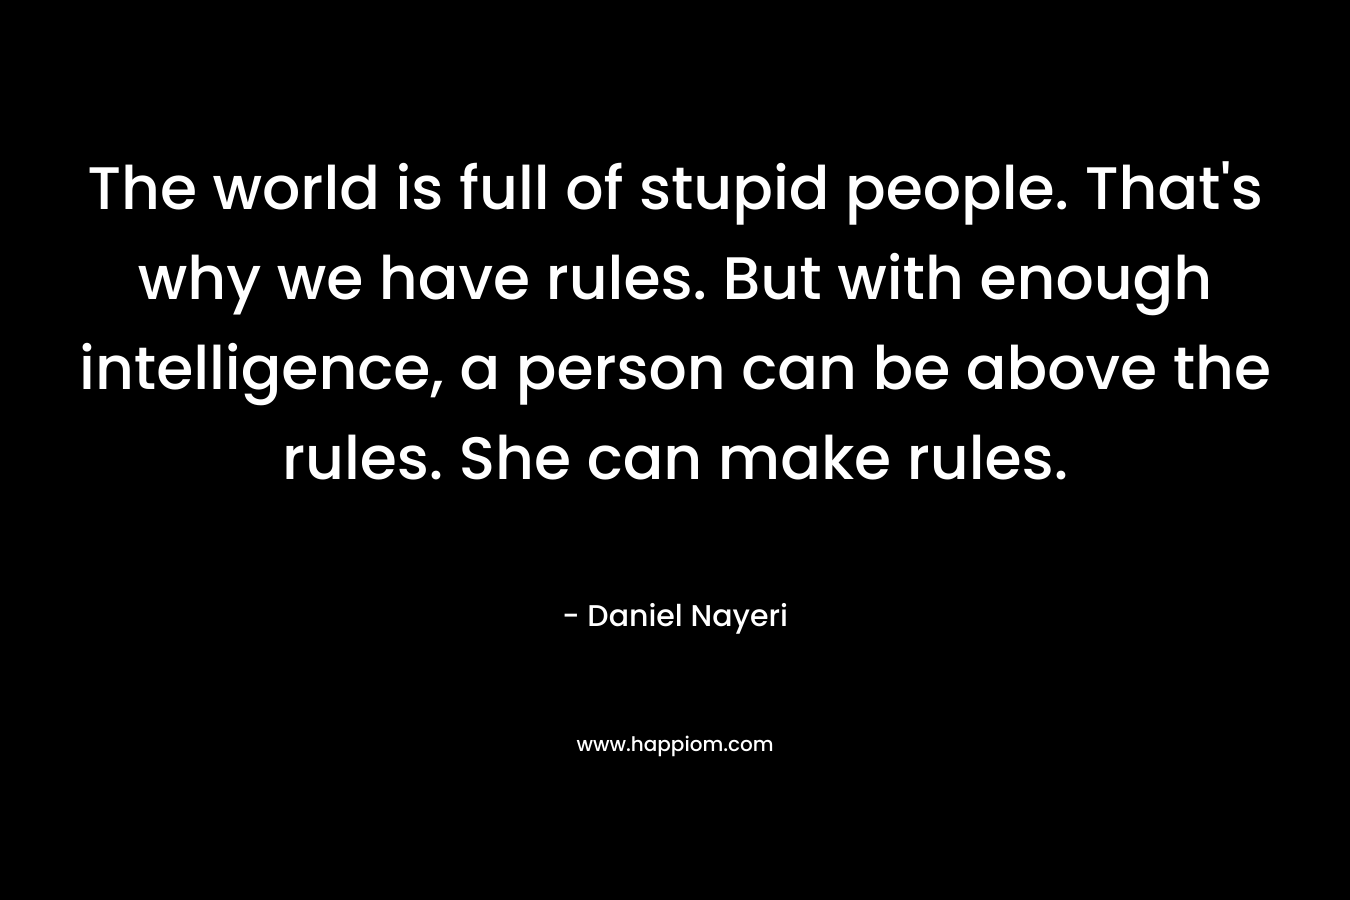 The world is full of stupid people. That’s why we have rules. But with enough intelligence, a person can be above the rules. She can make rules. – Daniel Nayeri